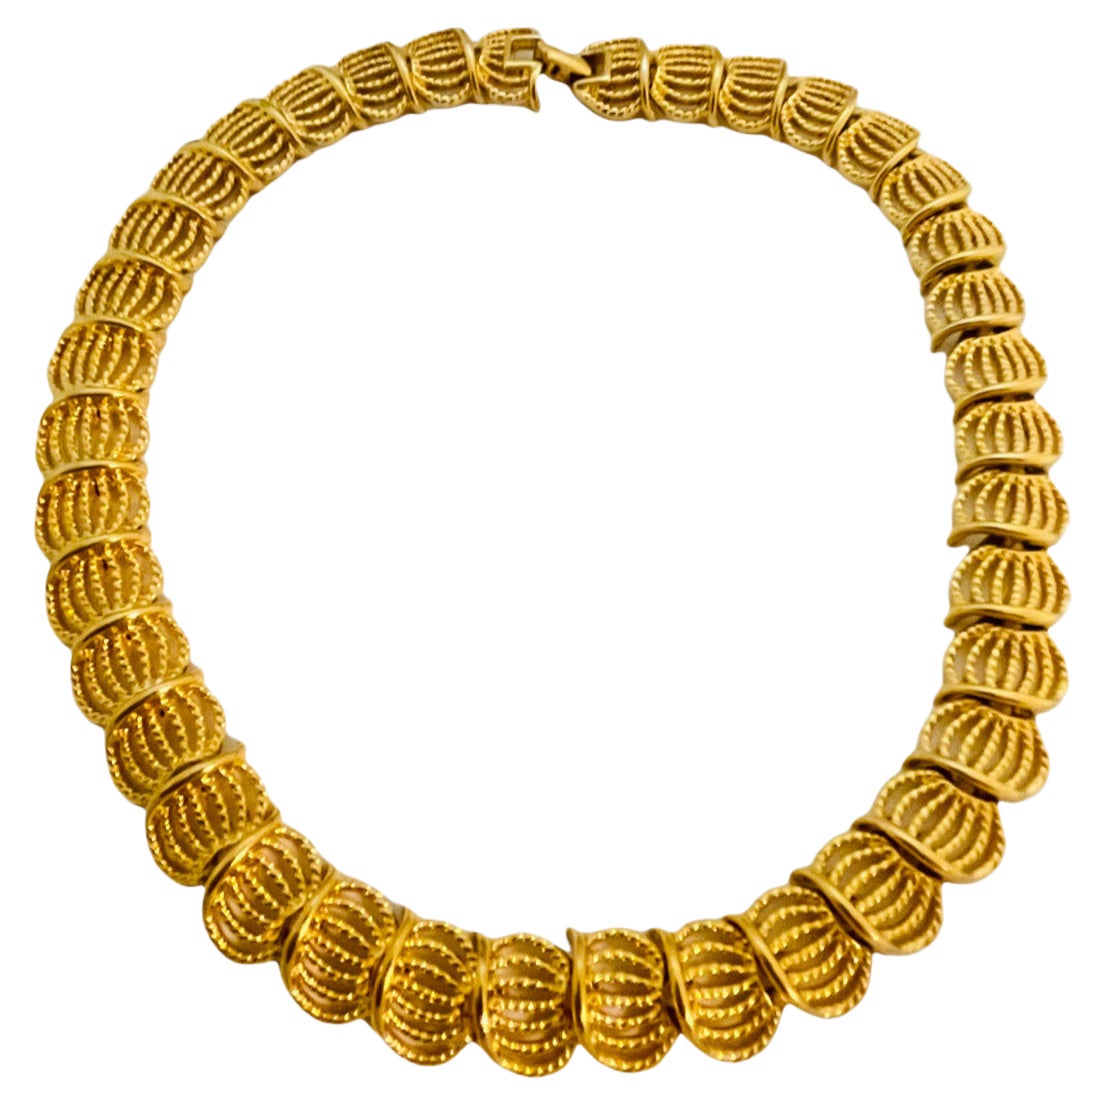 Vintage Napier Gold Woven Statement Necklace – Admiral Row